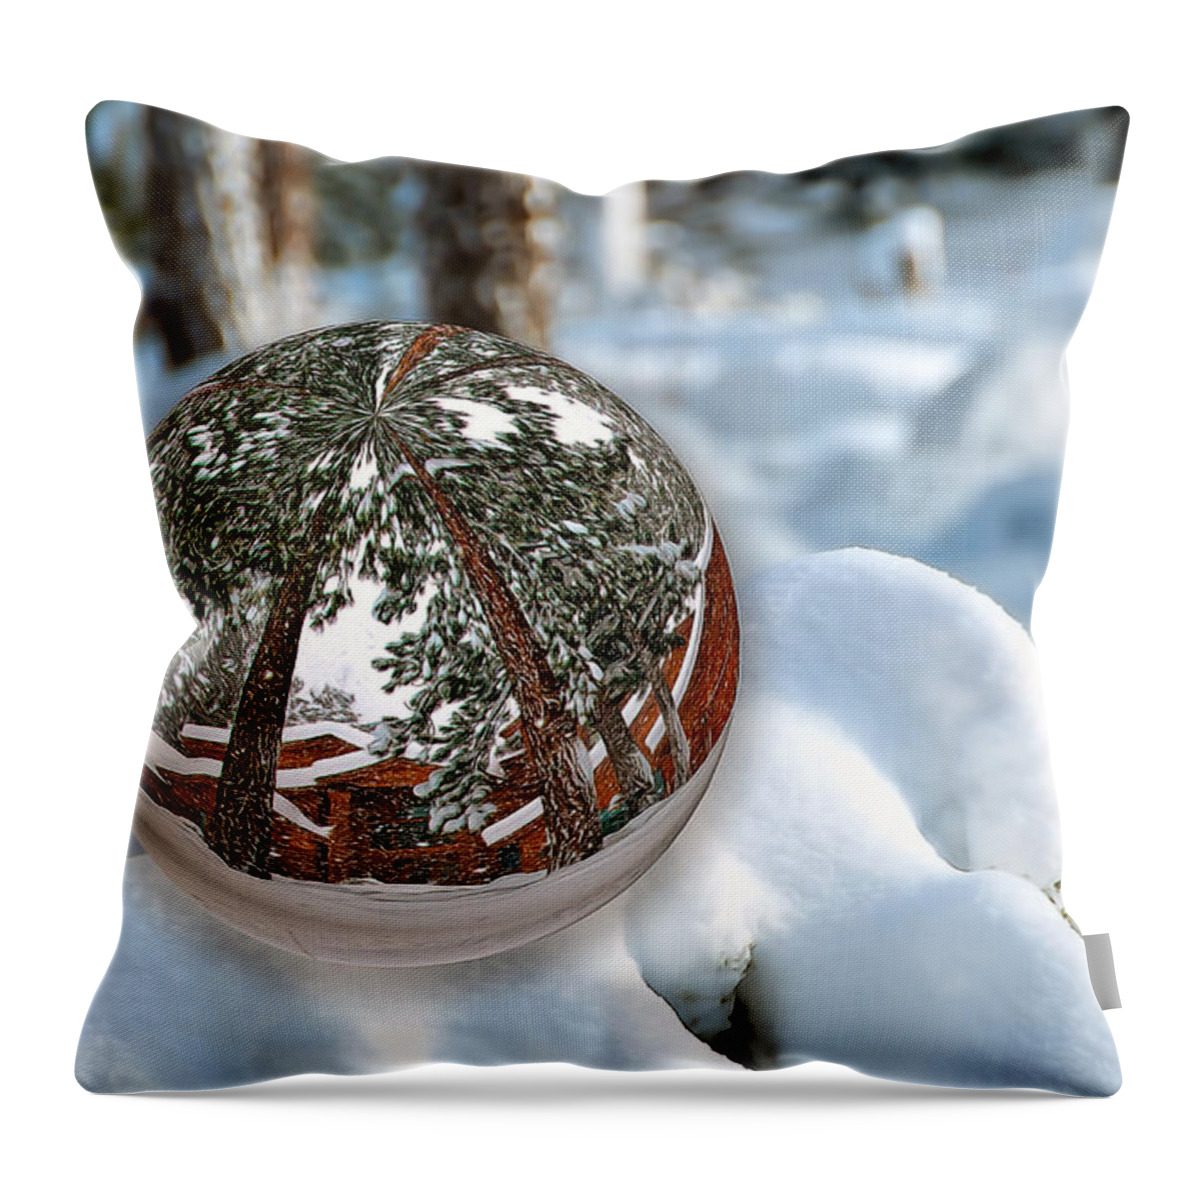 Conceptual Throw Pillow featuring the photograph Crystal Ball by Maria Coulson